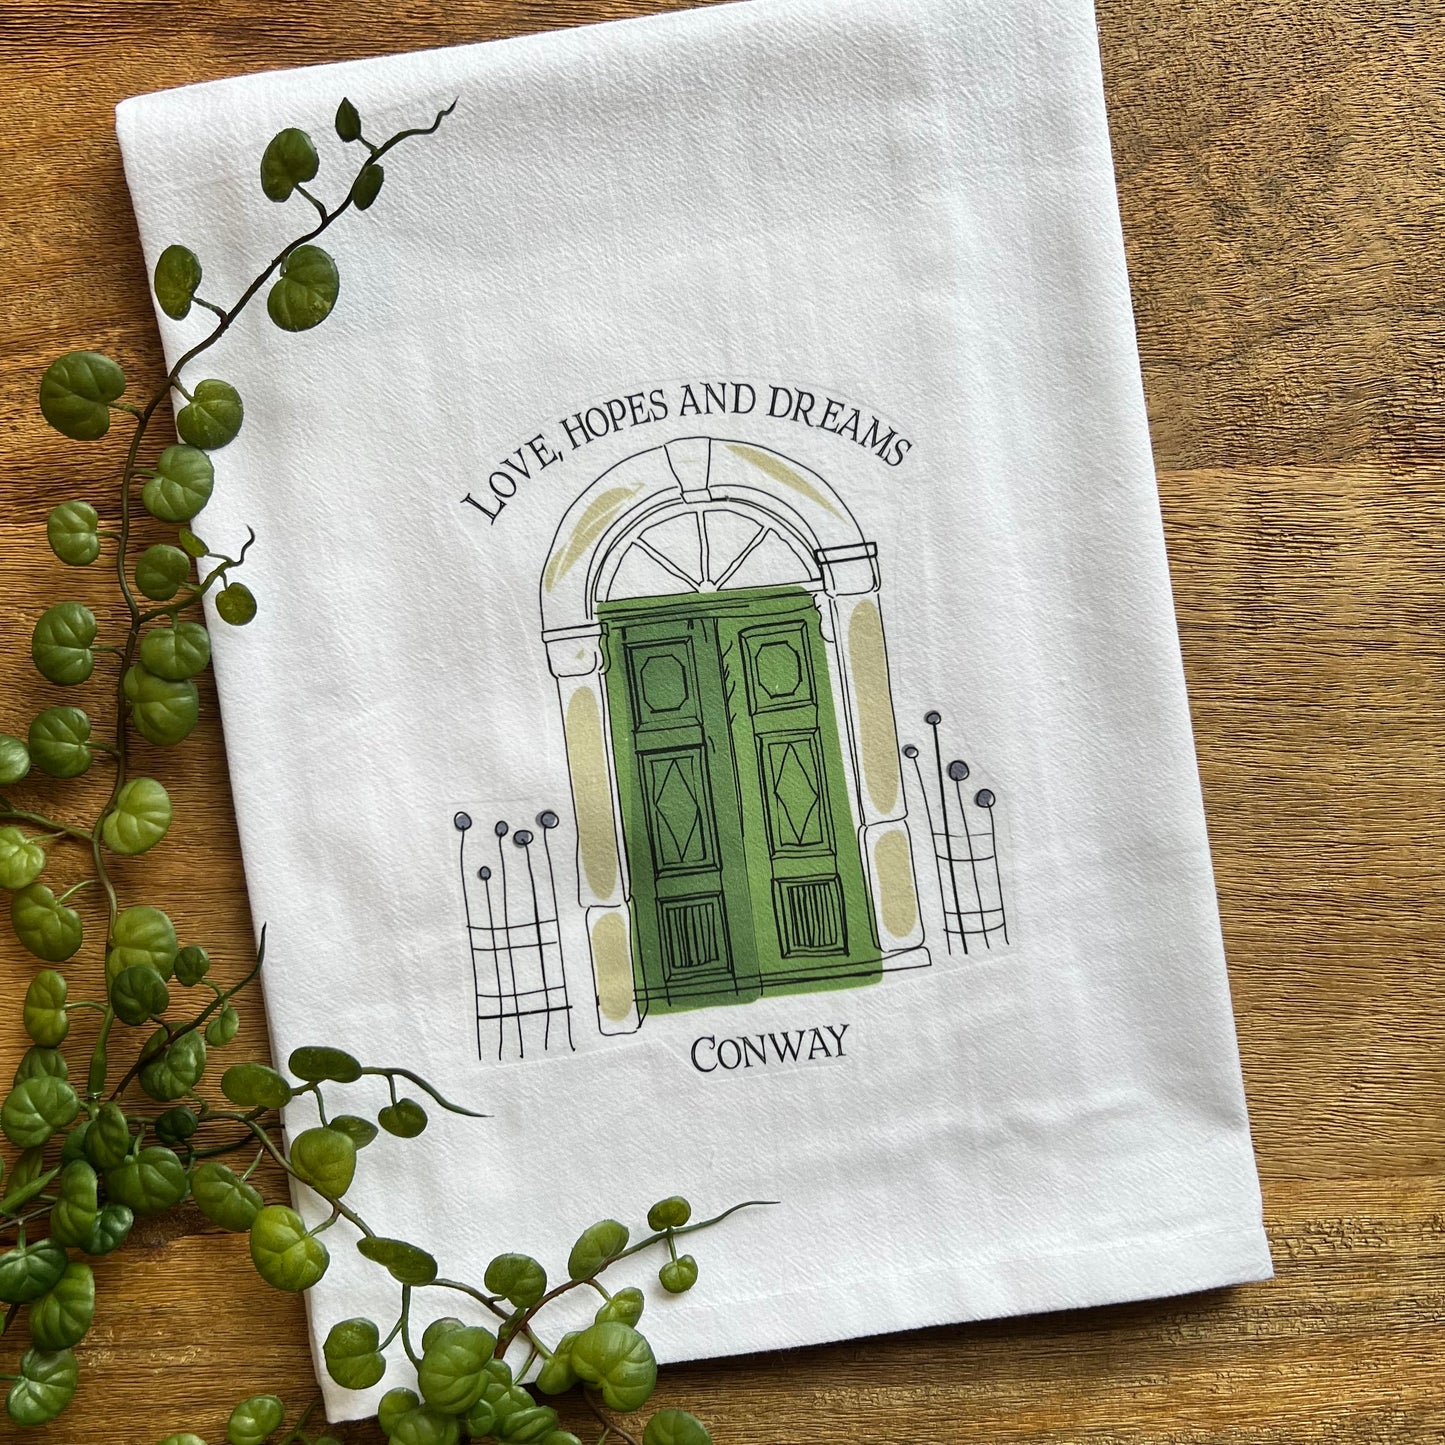 white towel with green front door design and "love, hopes and dreams" across the top and "conway along the bottom.